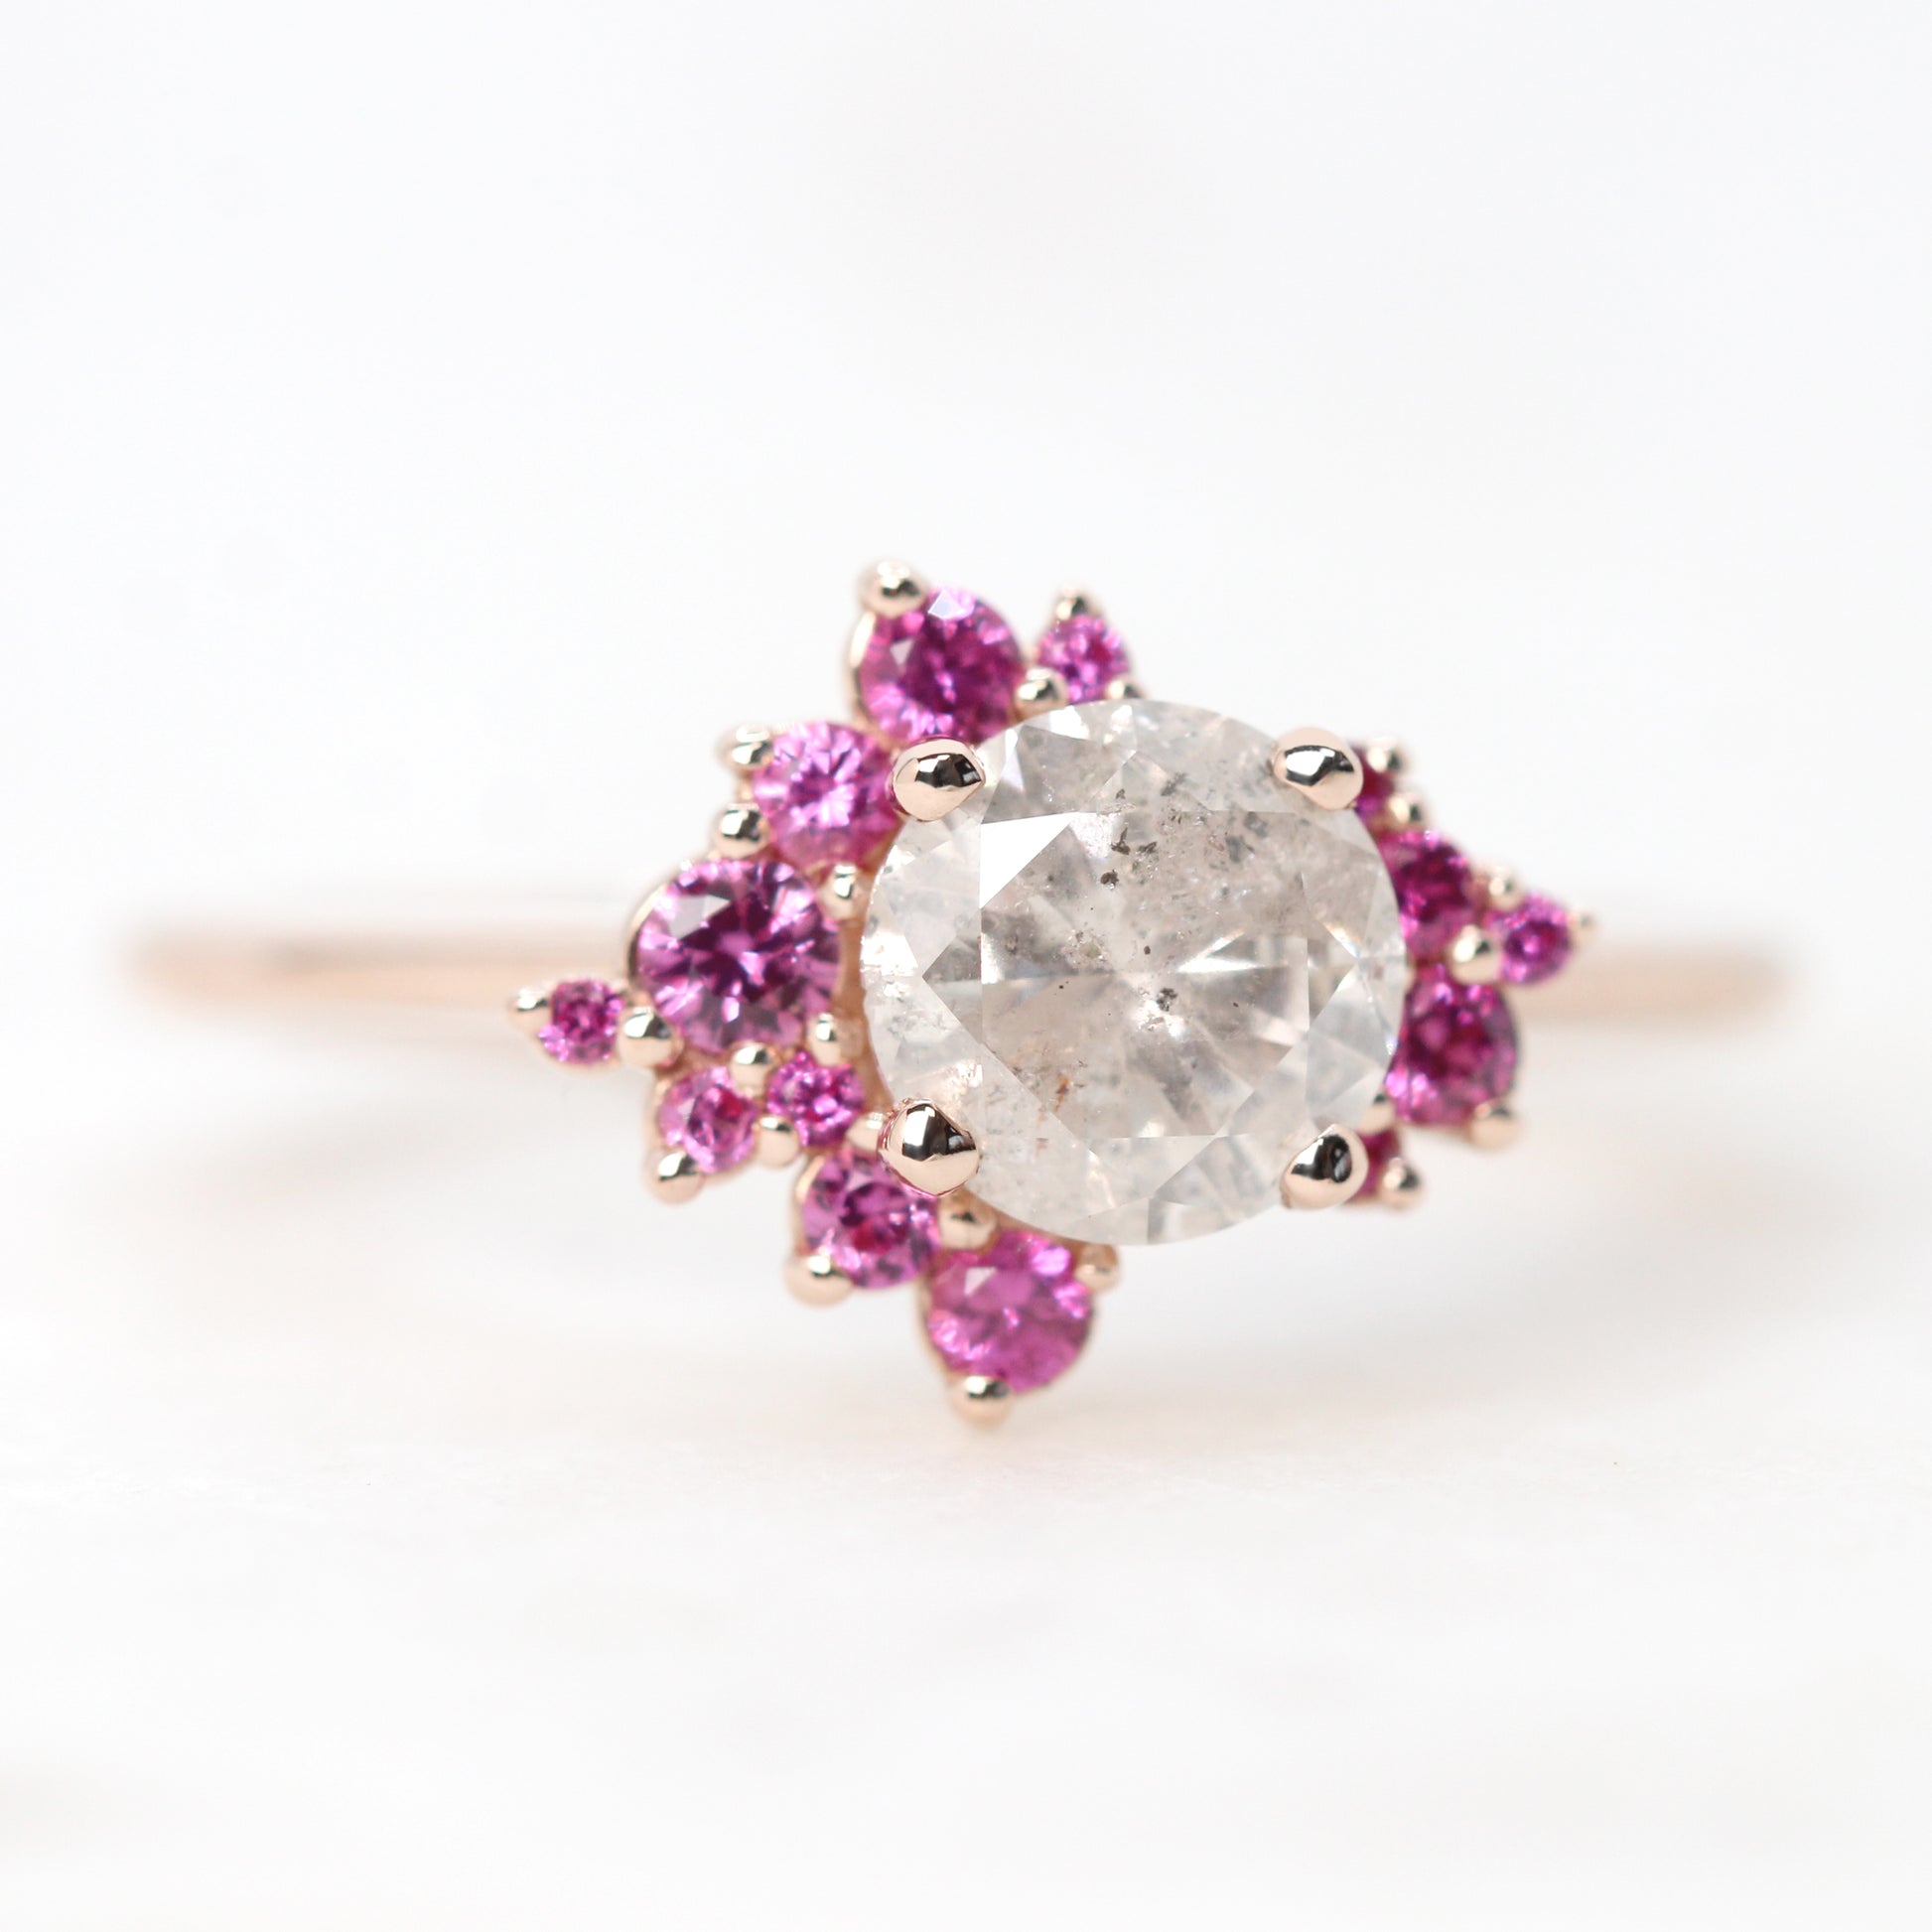 Orion Ring with a 1.02 Carat Round White Celestial Diamond and Pink Sapphire Accents in 14k Rose Gold - Ready to Size and Ship - Midwinter Co. Alternative Bridal Rings and Modern Fine Jewelry